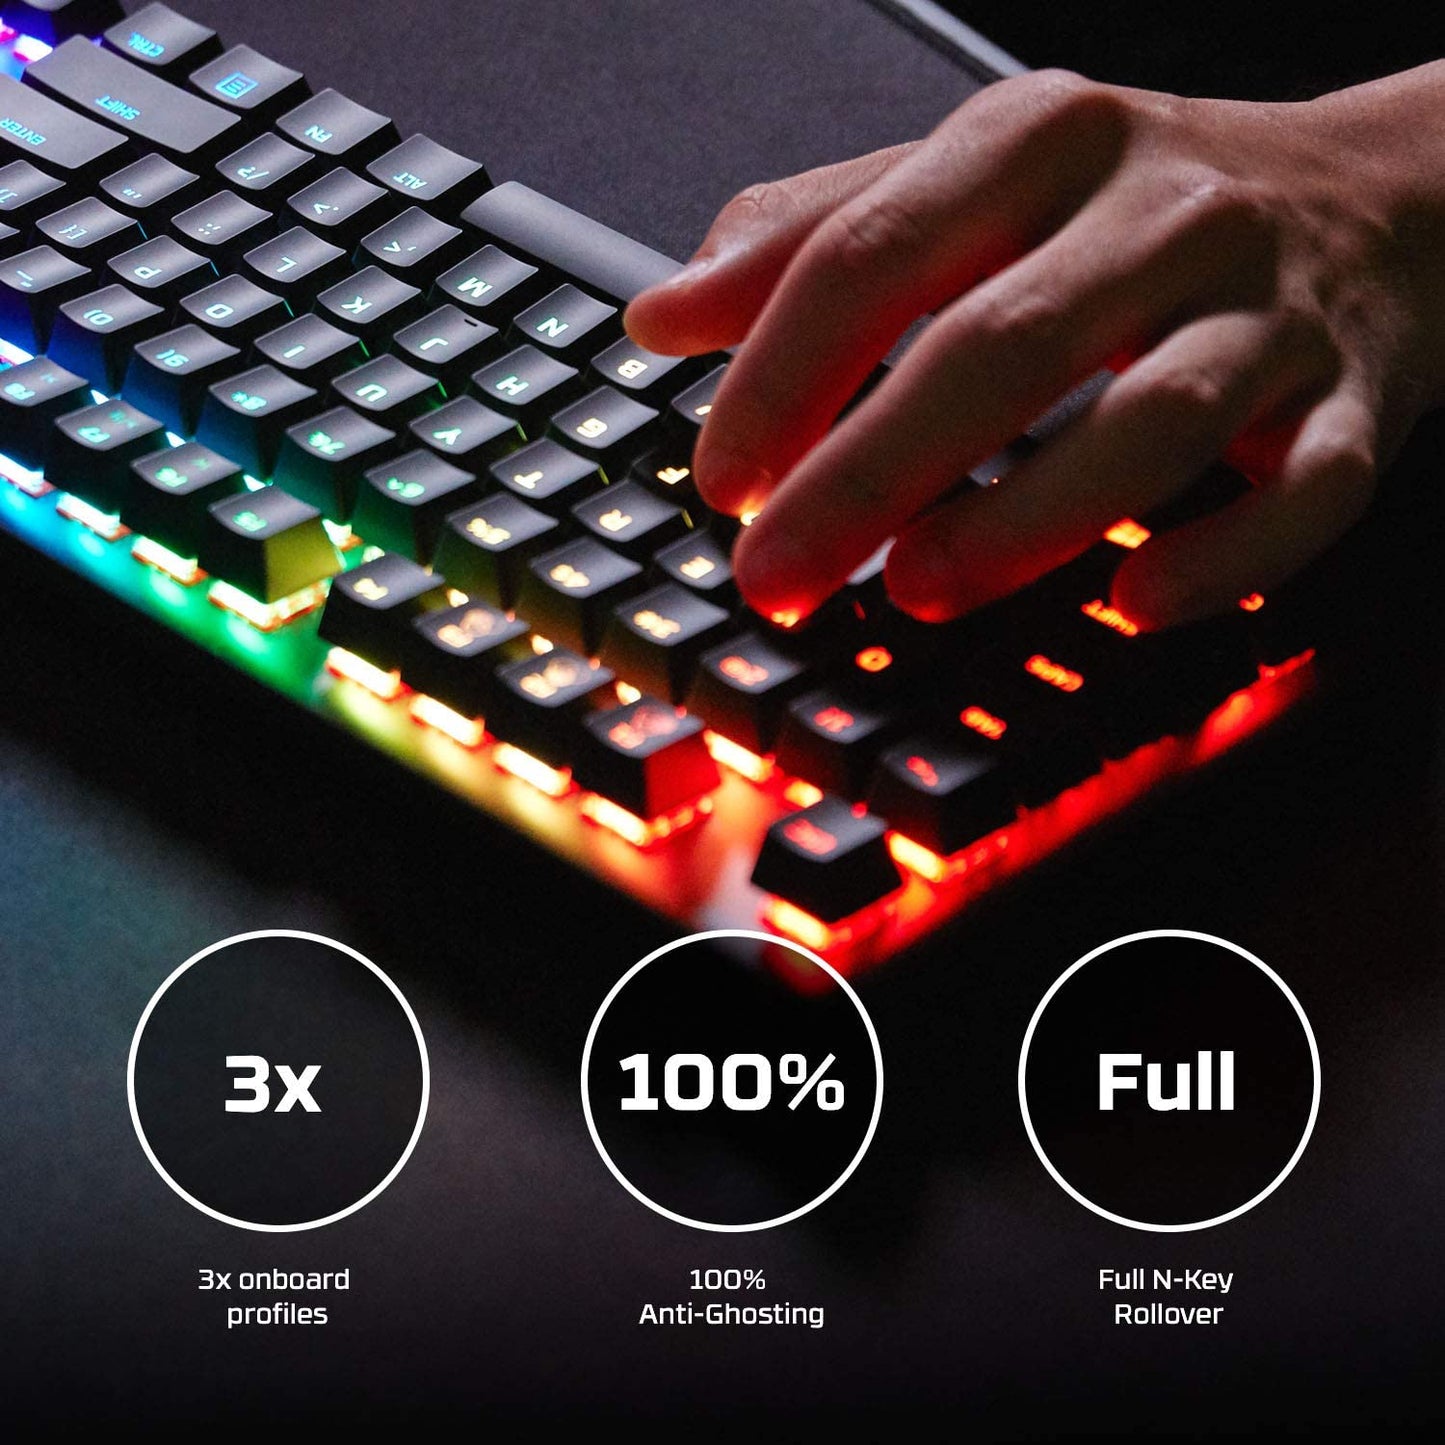 HyperX HX-KB6RDX-US Alloy Mechanical Gaming Keyboard, Software-Controlled Light & Macro Customization, Compact Form Factor, RGB LED Backlit - Linear HyperX Red Switch